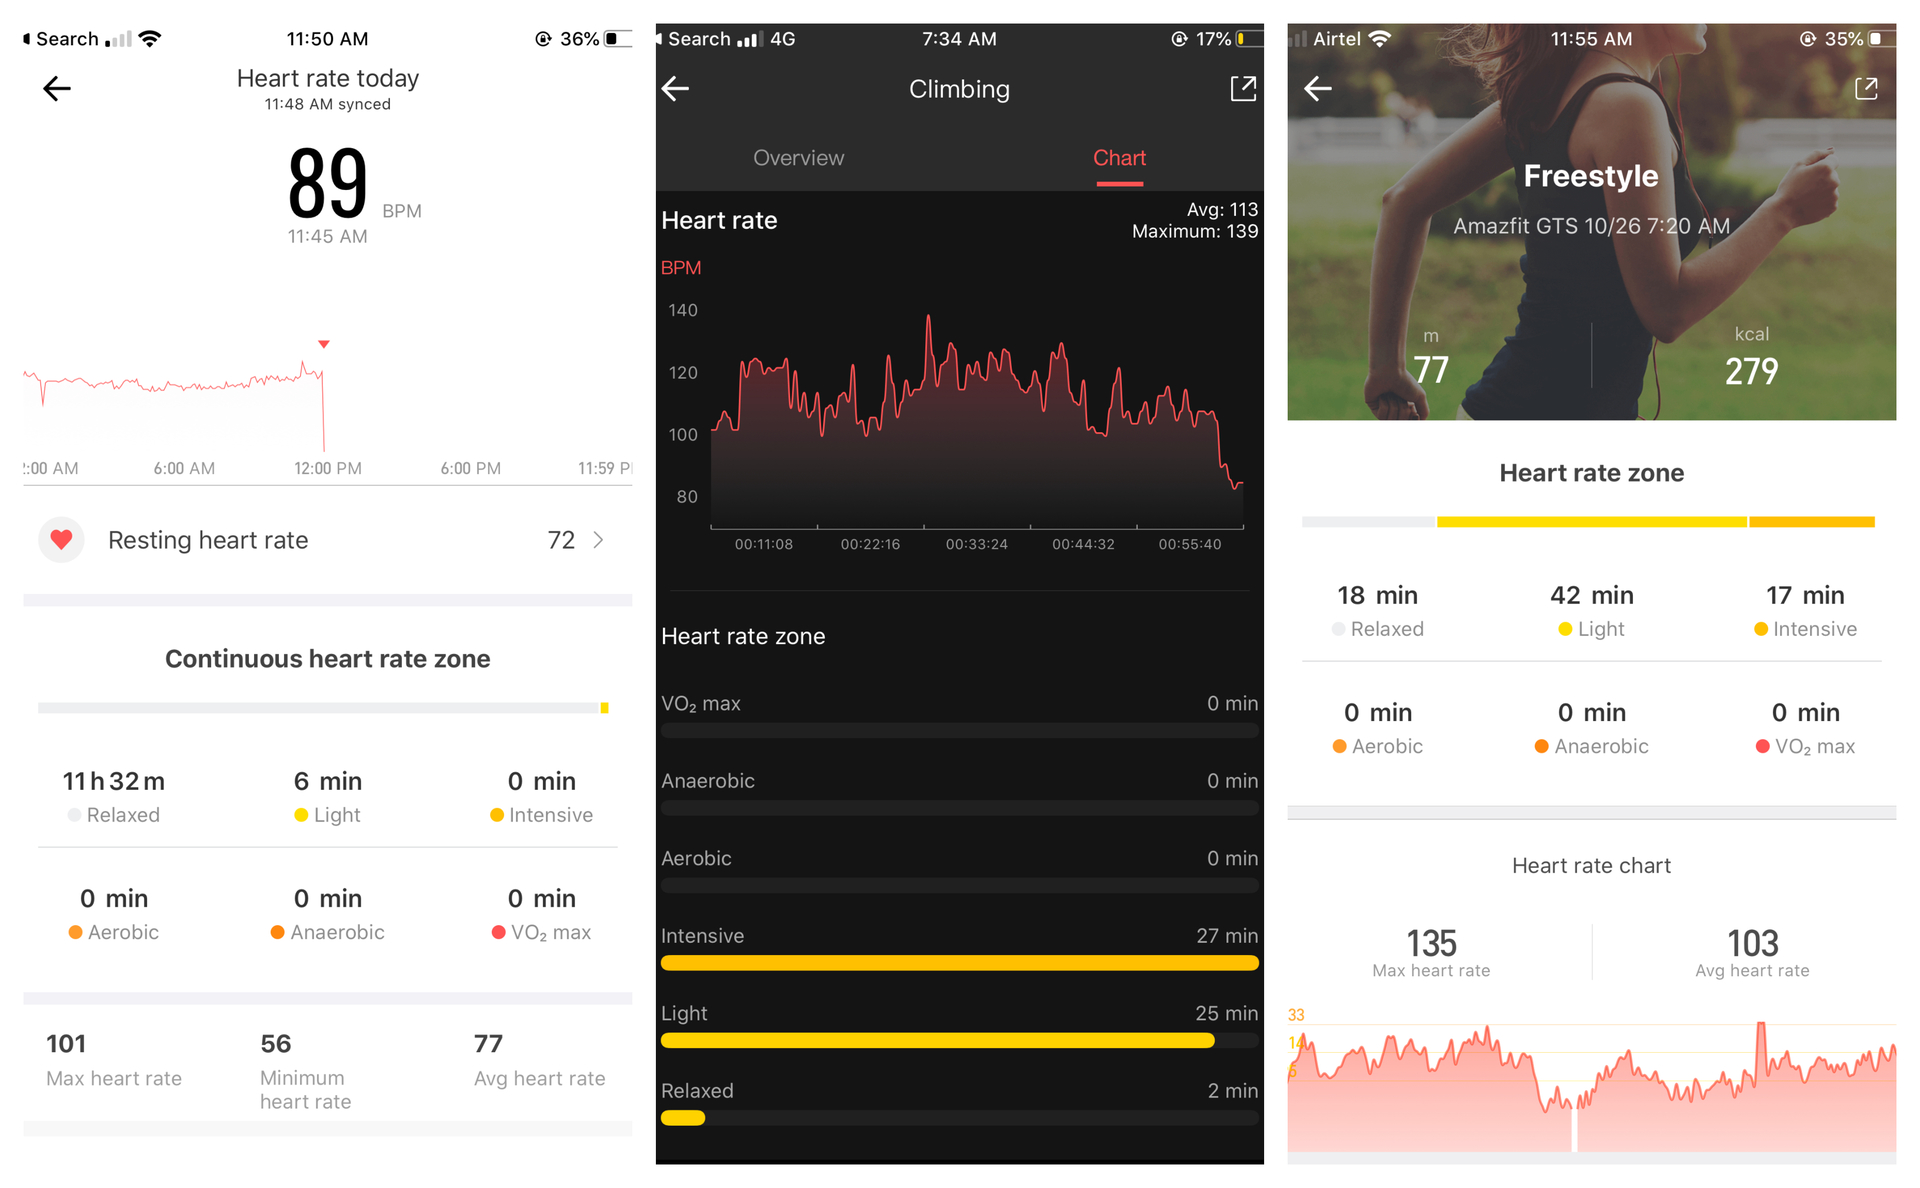 Amazfit GTS heart rate monitoring on app